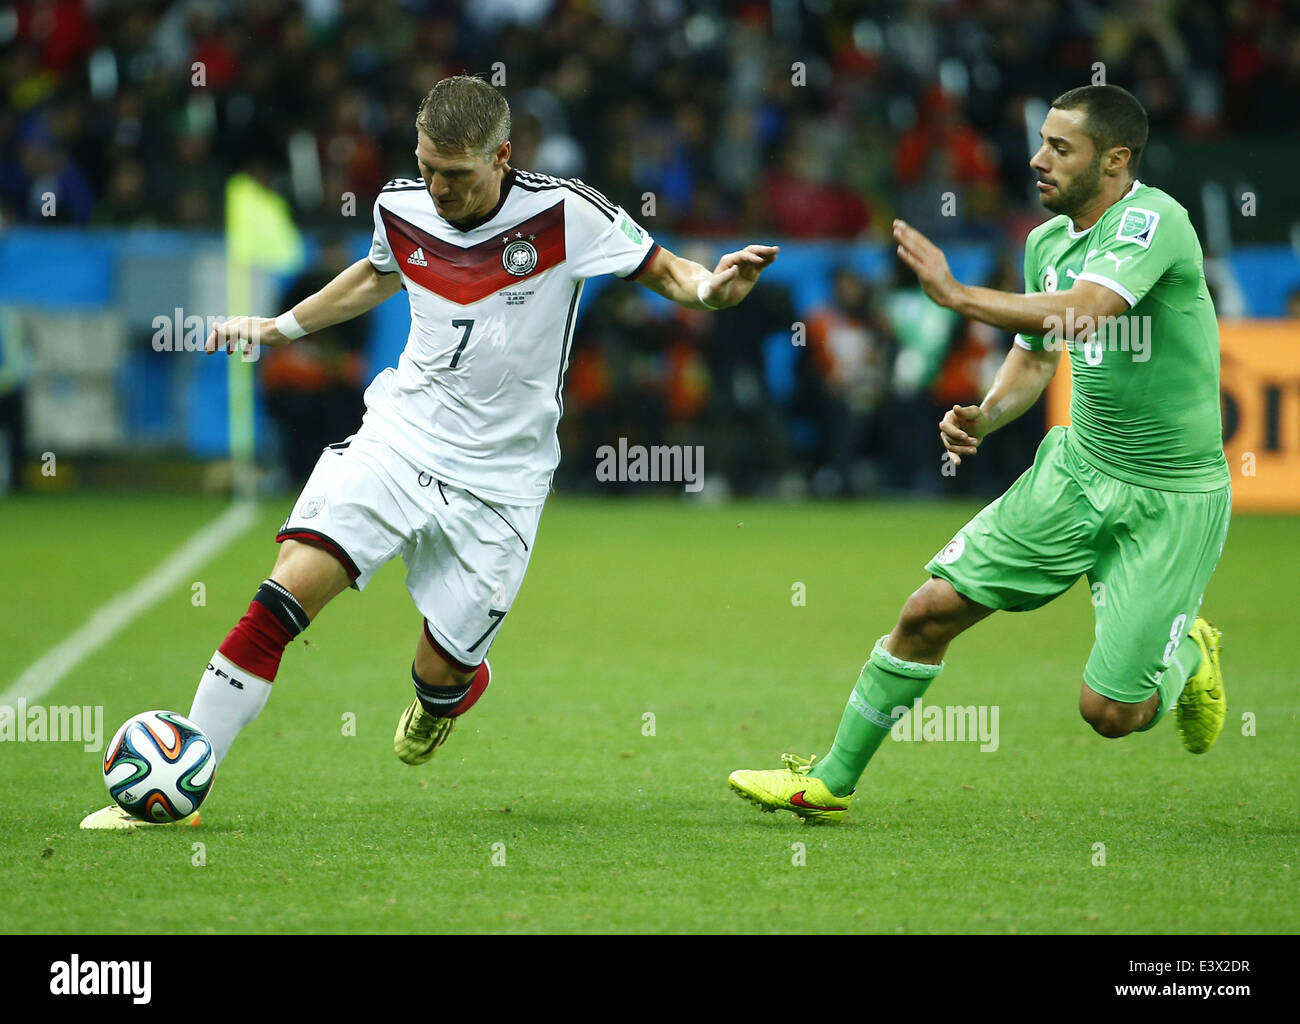 Porto Alegre, Brazil. 30th June, 2014. Germany's Bastian Schweinsteiger vies with Algeria's Medhi Lacen during a Round of 16 match between Germany and Algeria of 2014 FIFA World Cup at the Estadio Beira-Rio Stadium in Porto Alegre, Brazil, on June 30, 2014. Credit:  Chen Jianli/Xinhua/Alamy Live News Stock Photo